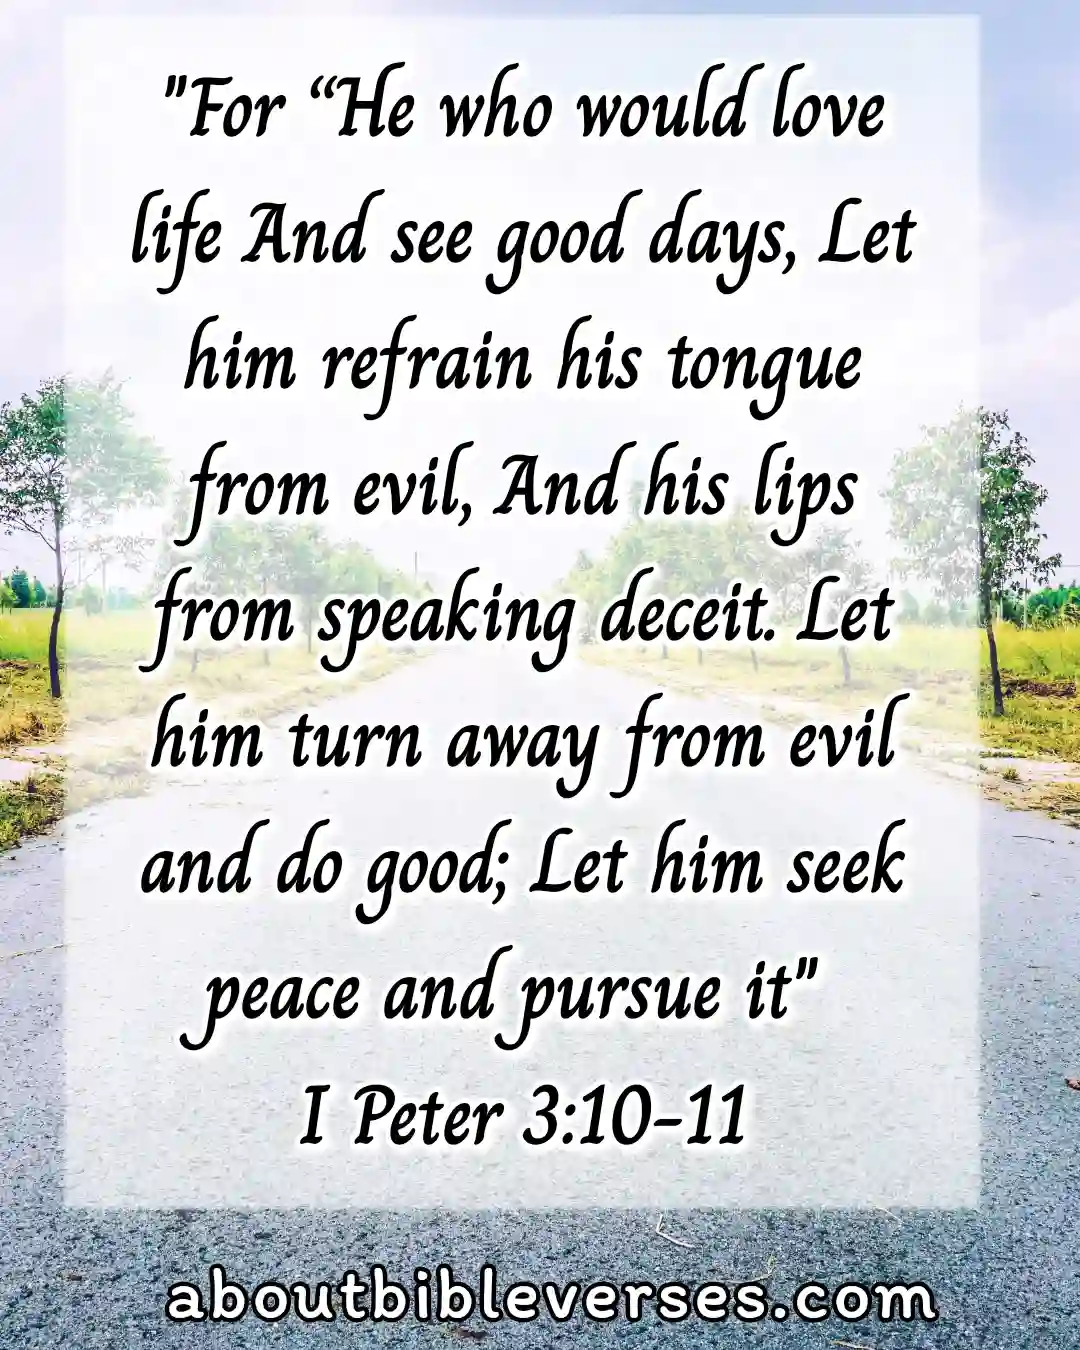 bible verses about peace (1 Peter 3:10-11)